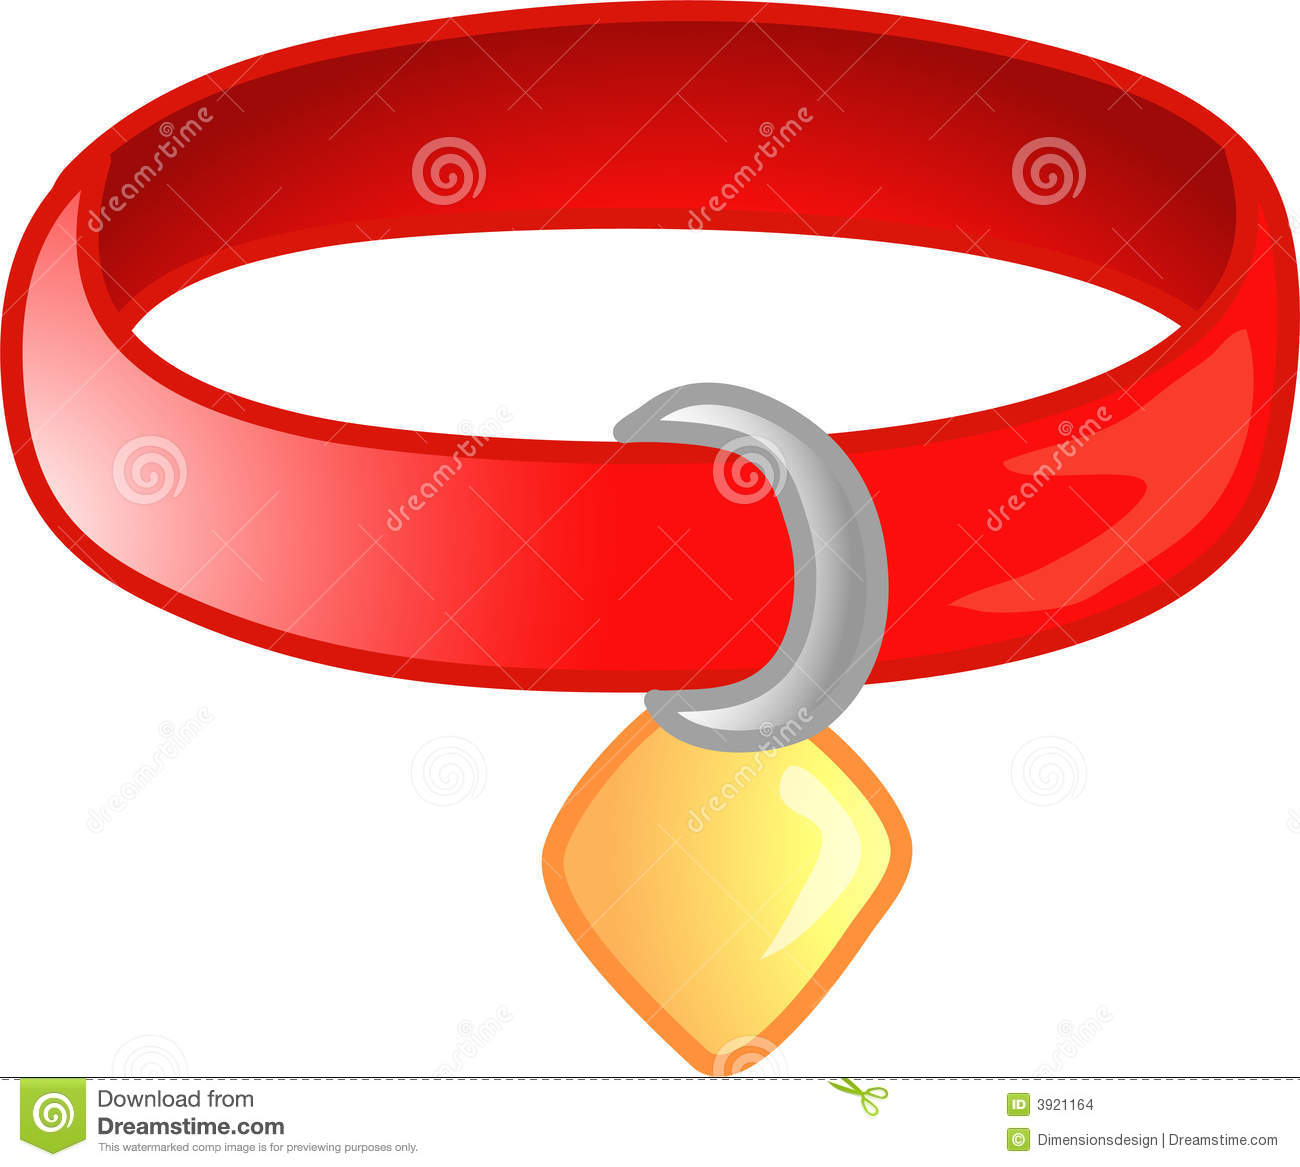 Red Pet Collar Icon Or Symbol Stock Images   Image  3921164